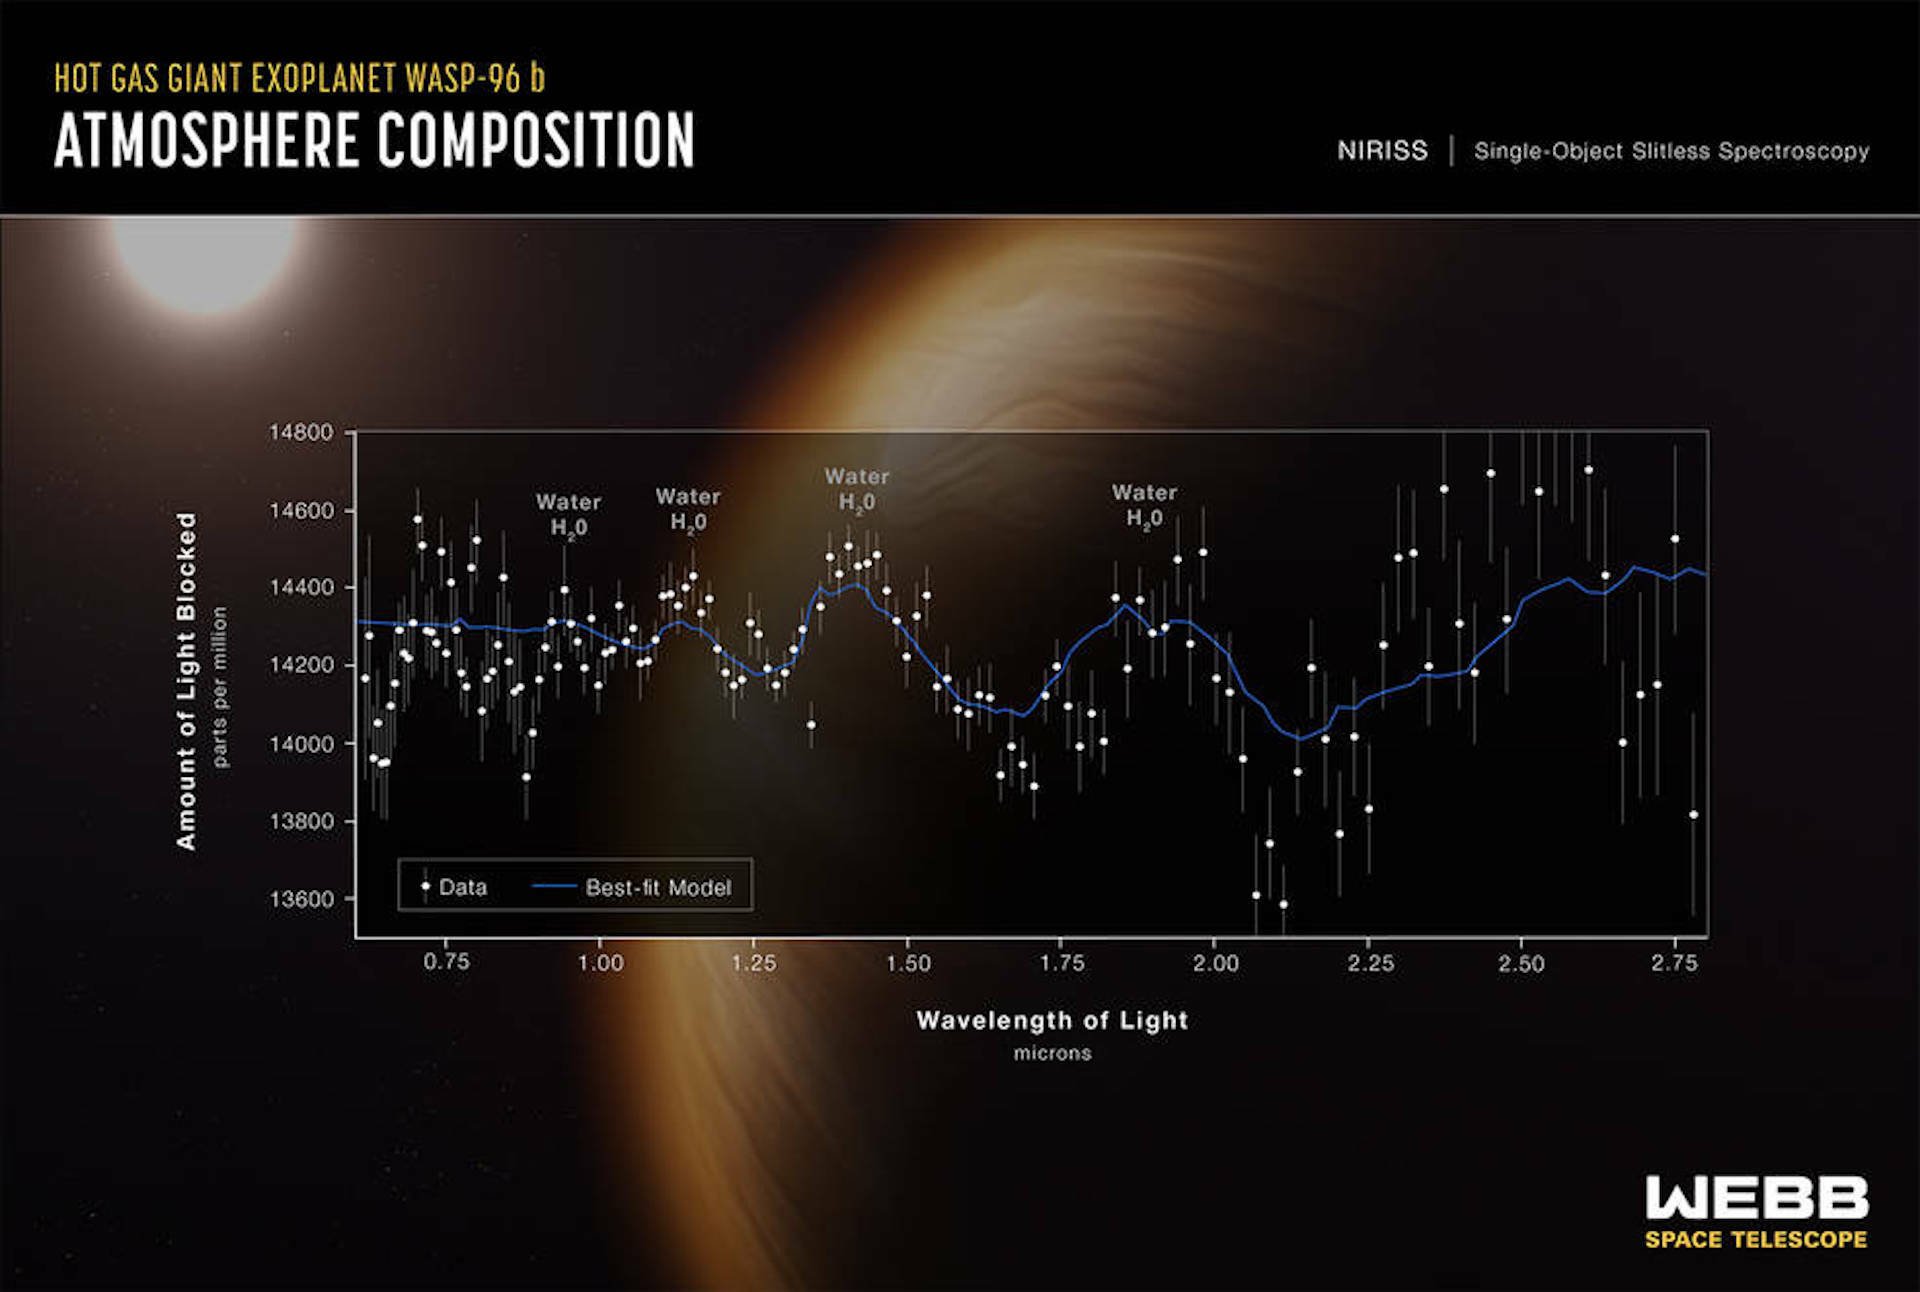 The James Webb Telescope shows the first spectrum of the gases on an exoplanet.